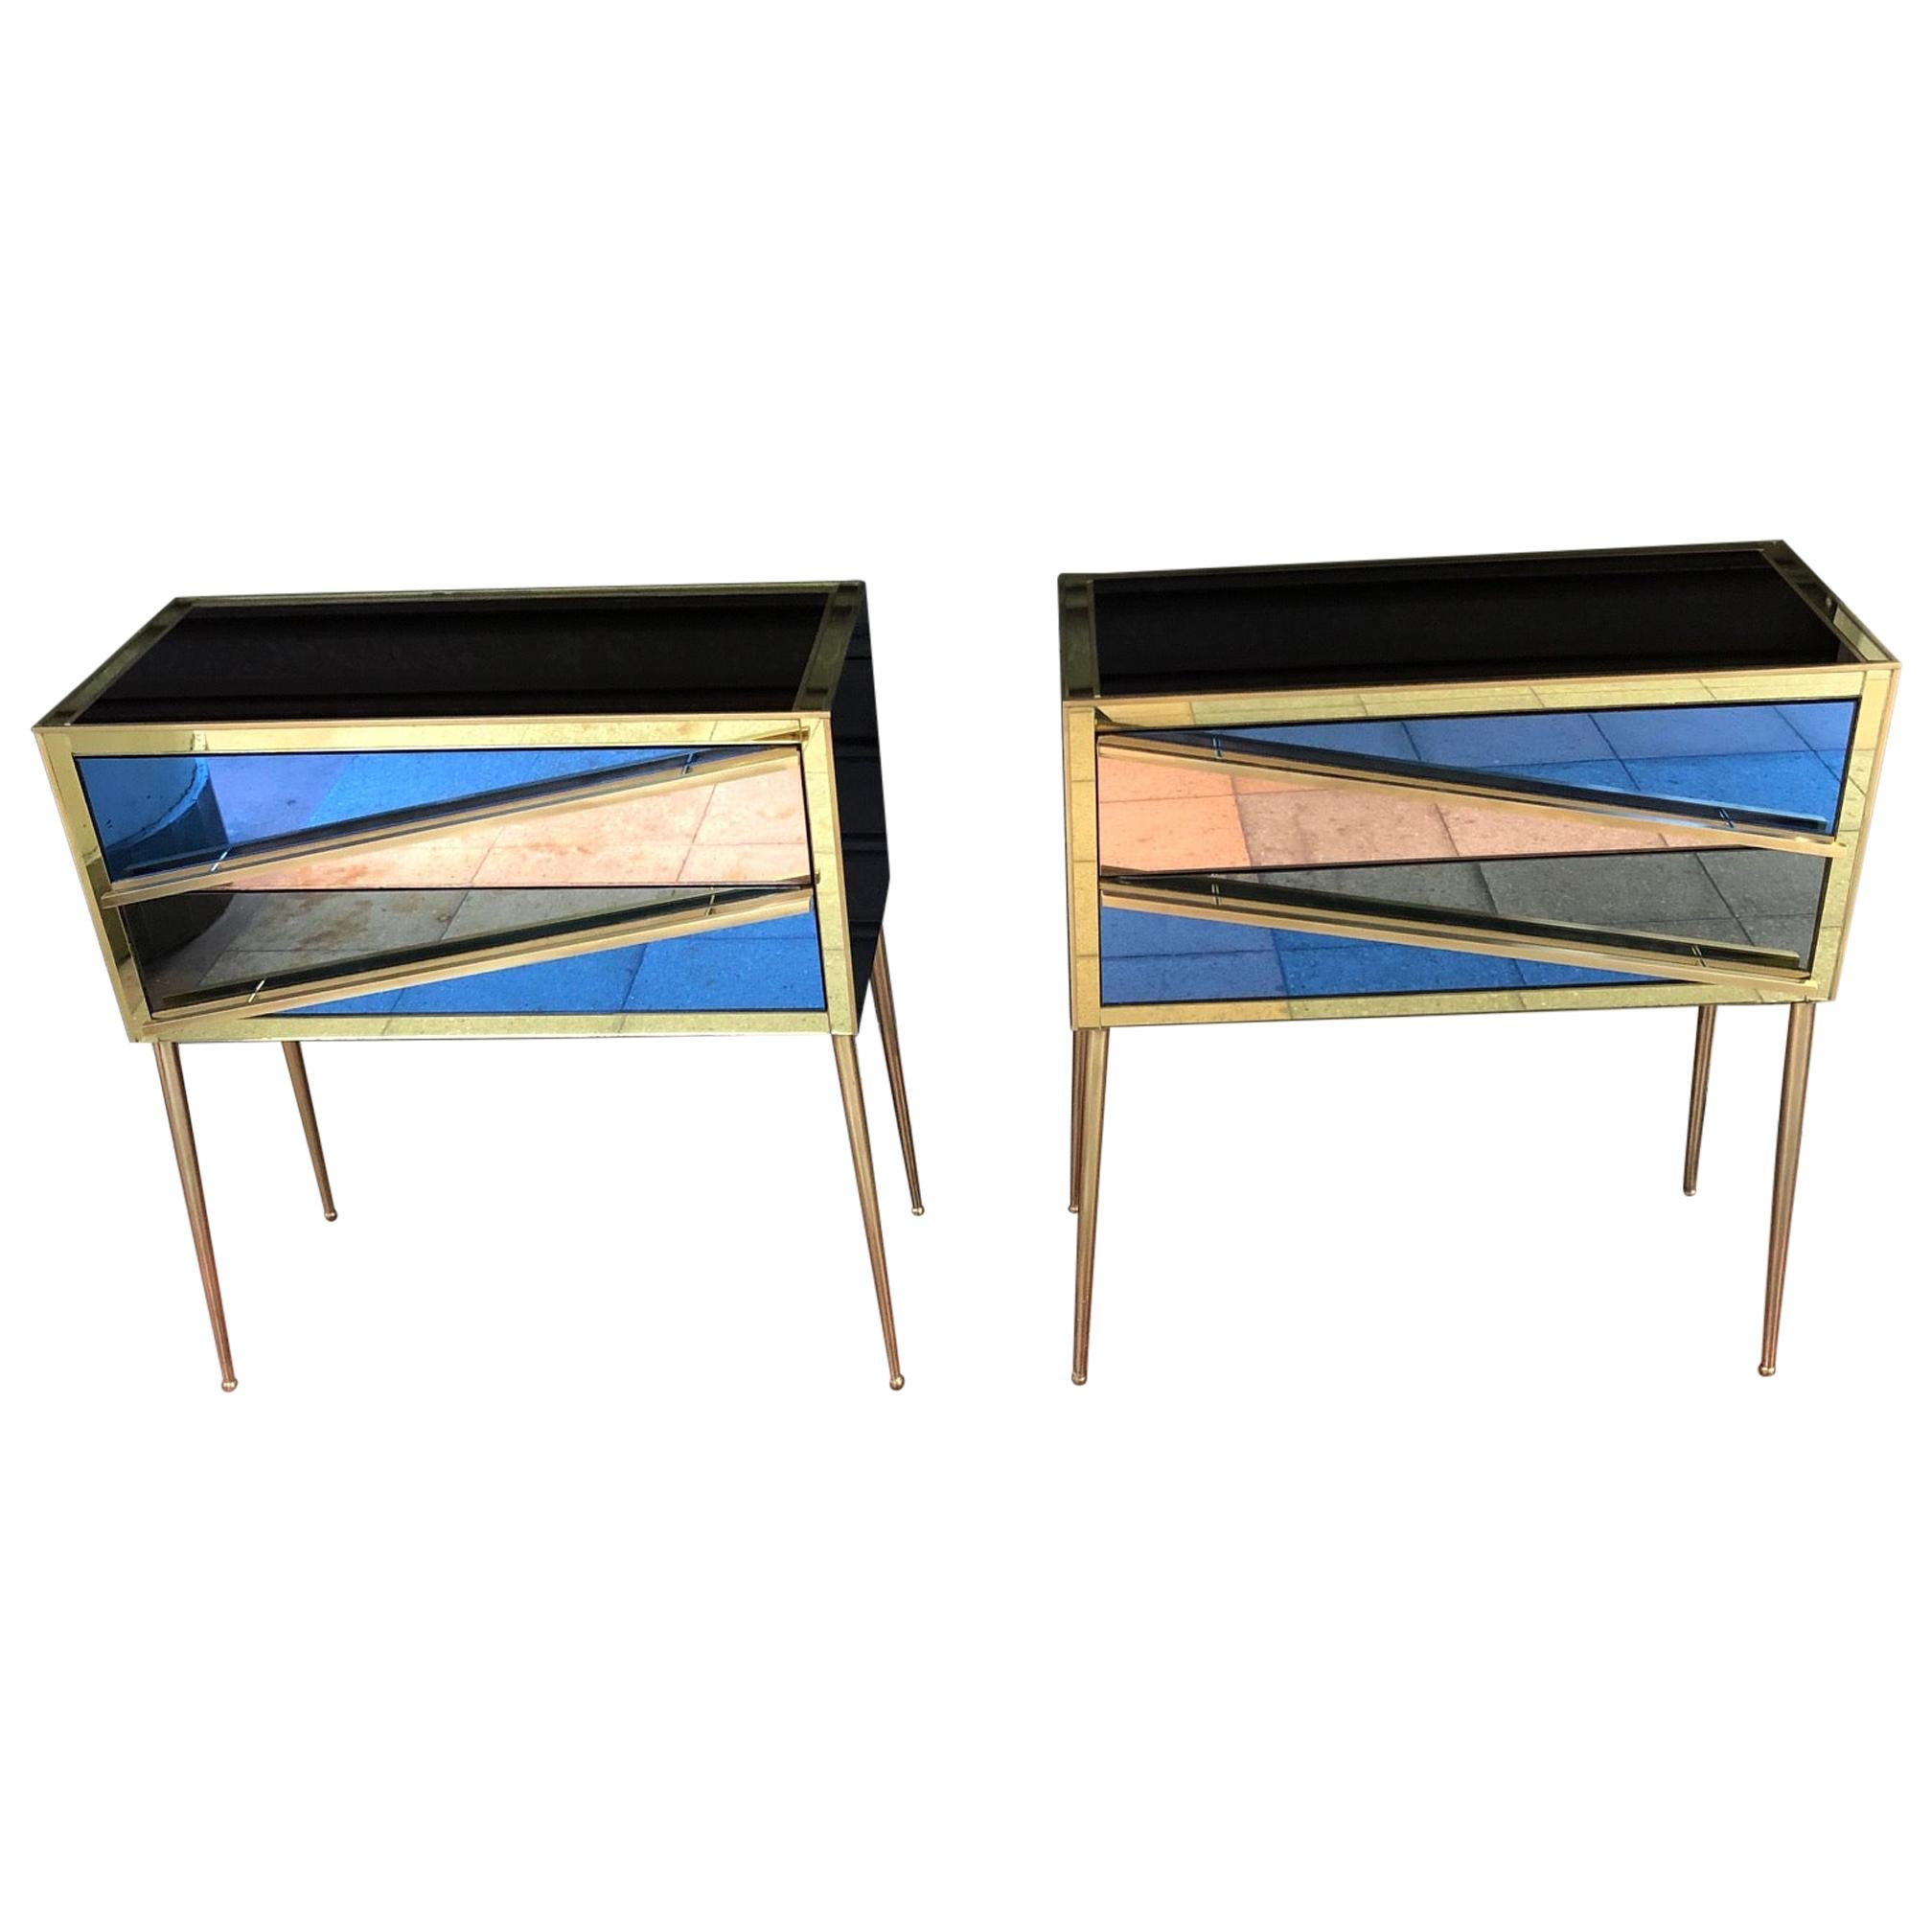 Pair of Italian Commodes in Brass in Tinted Glass and Brass with Two Drawers